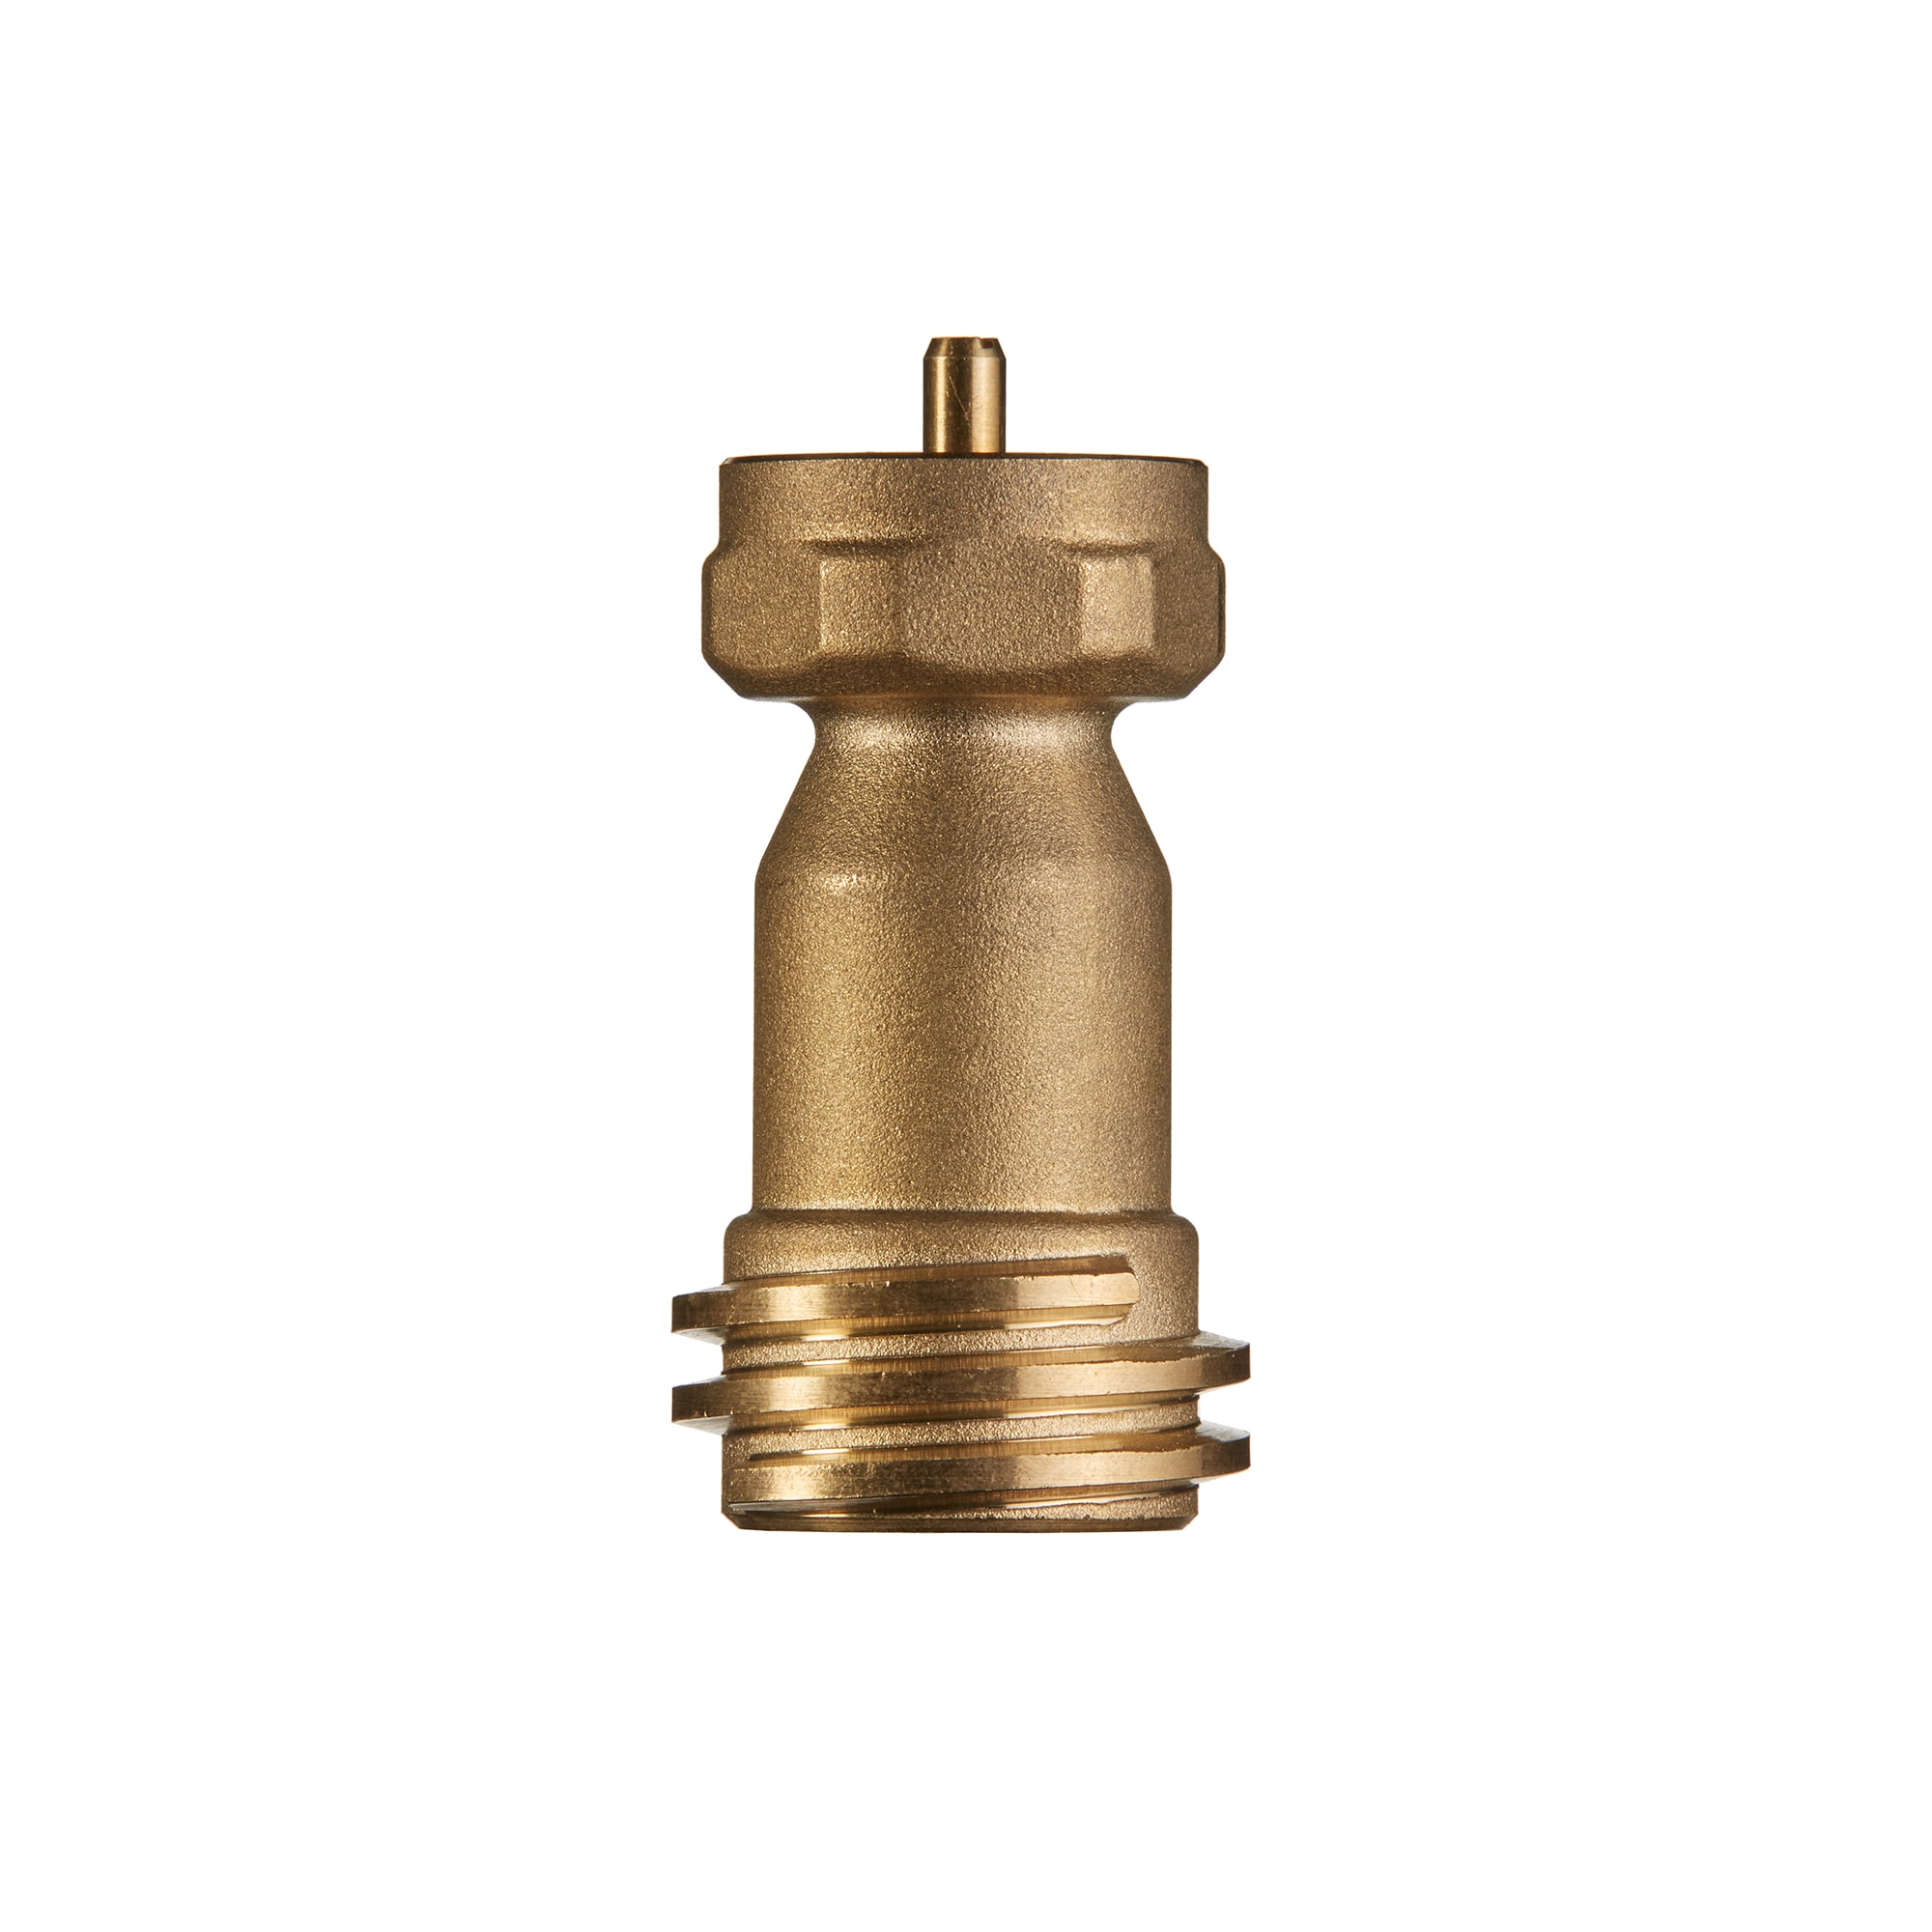 Updated Propane Fitting Refill Adapter Valve for 1LB Gas Bottle Refillable  Tank Cylinders,QCC Valve Connector,Brass/Metal,CGA600 Valve Connector